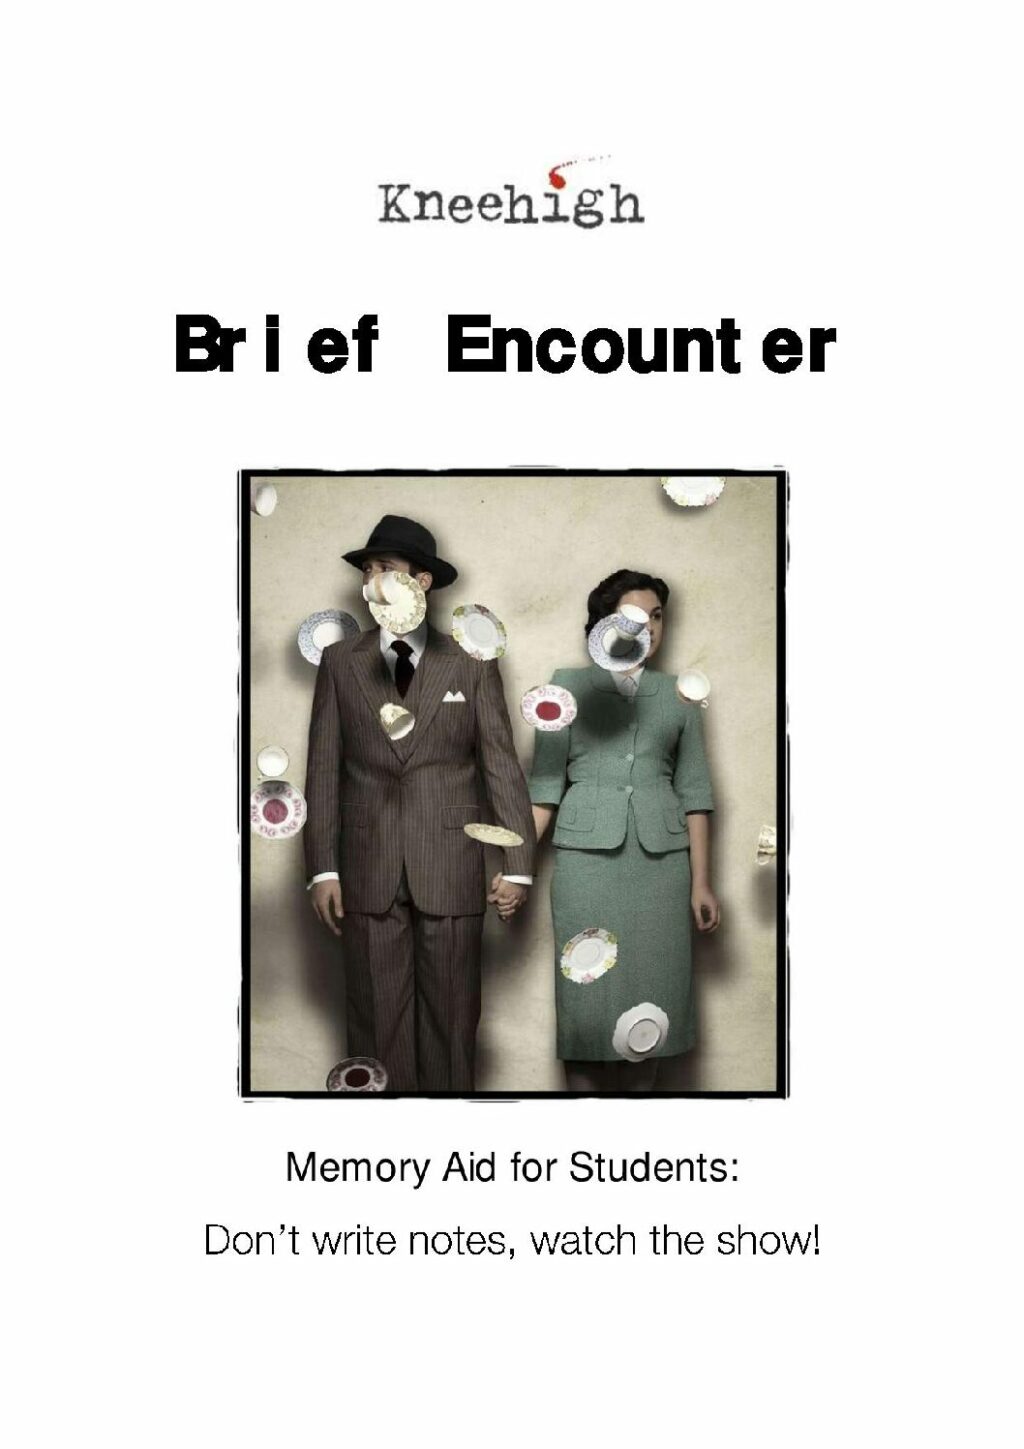 Kneehigh - Brief Encounter - Notes for Students